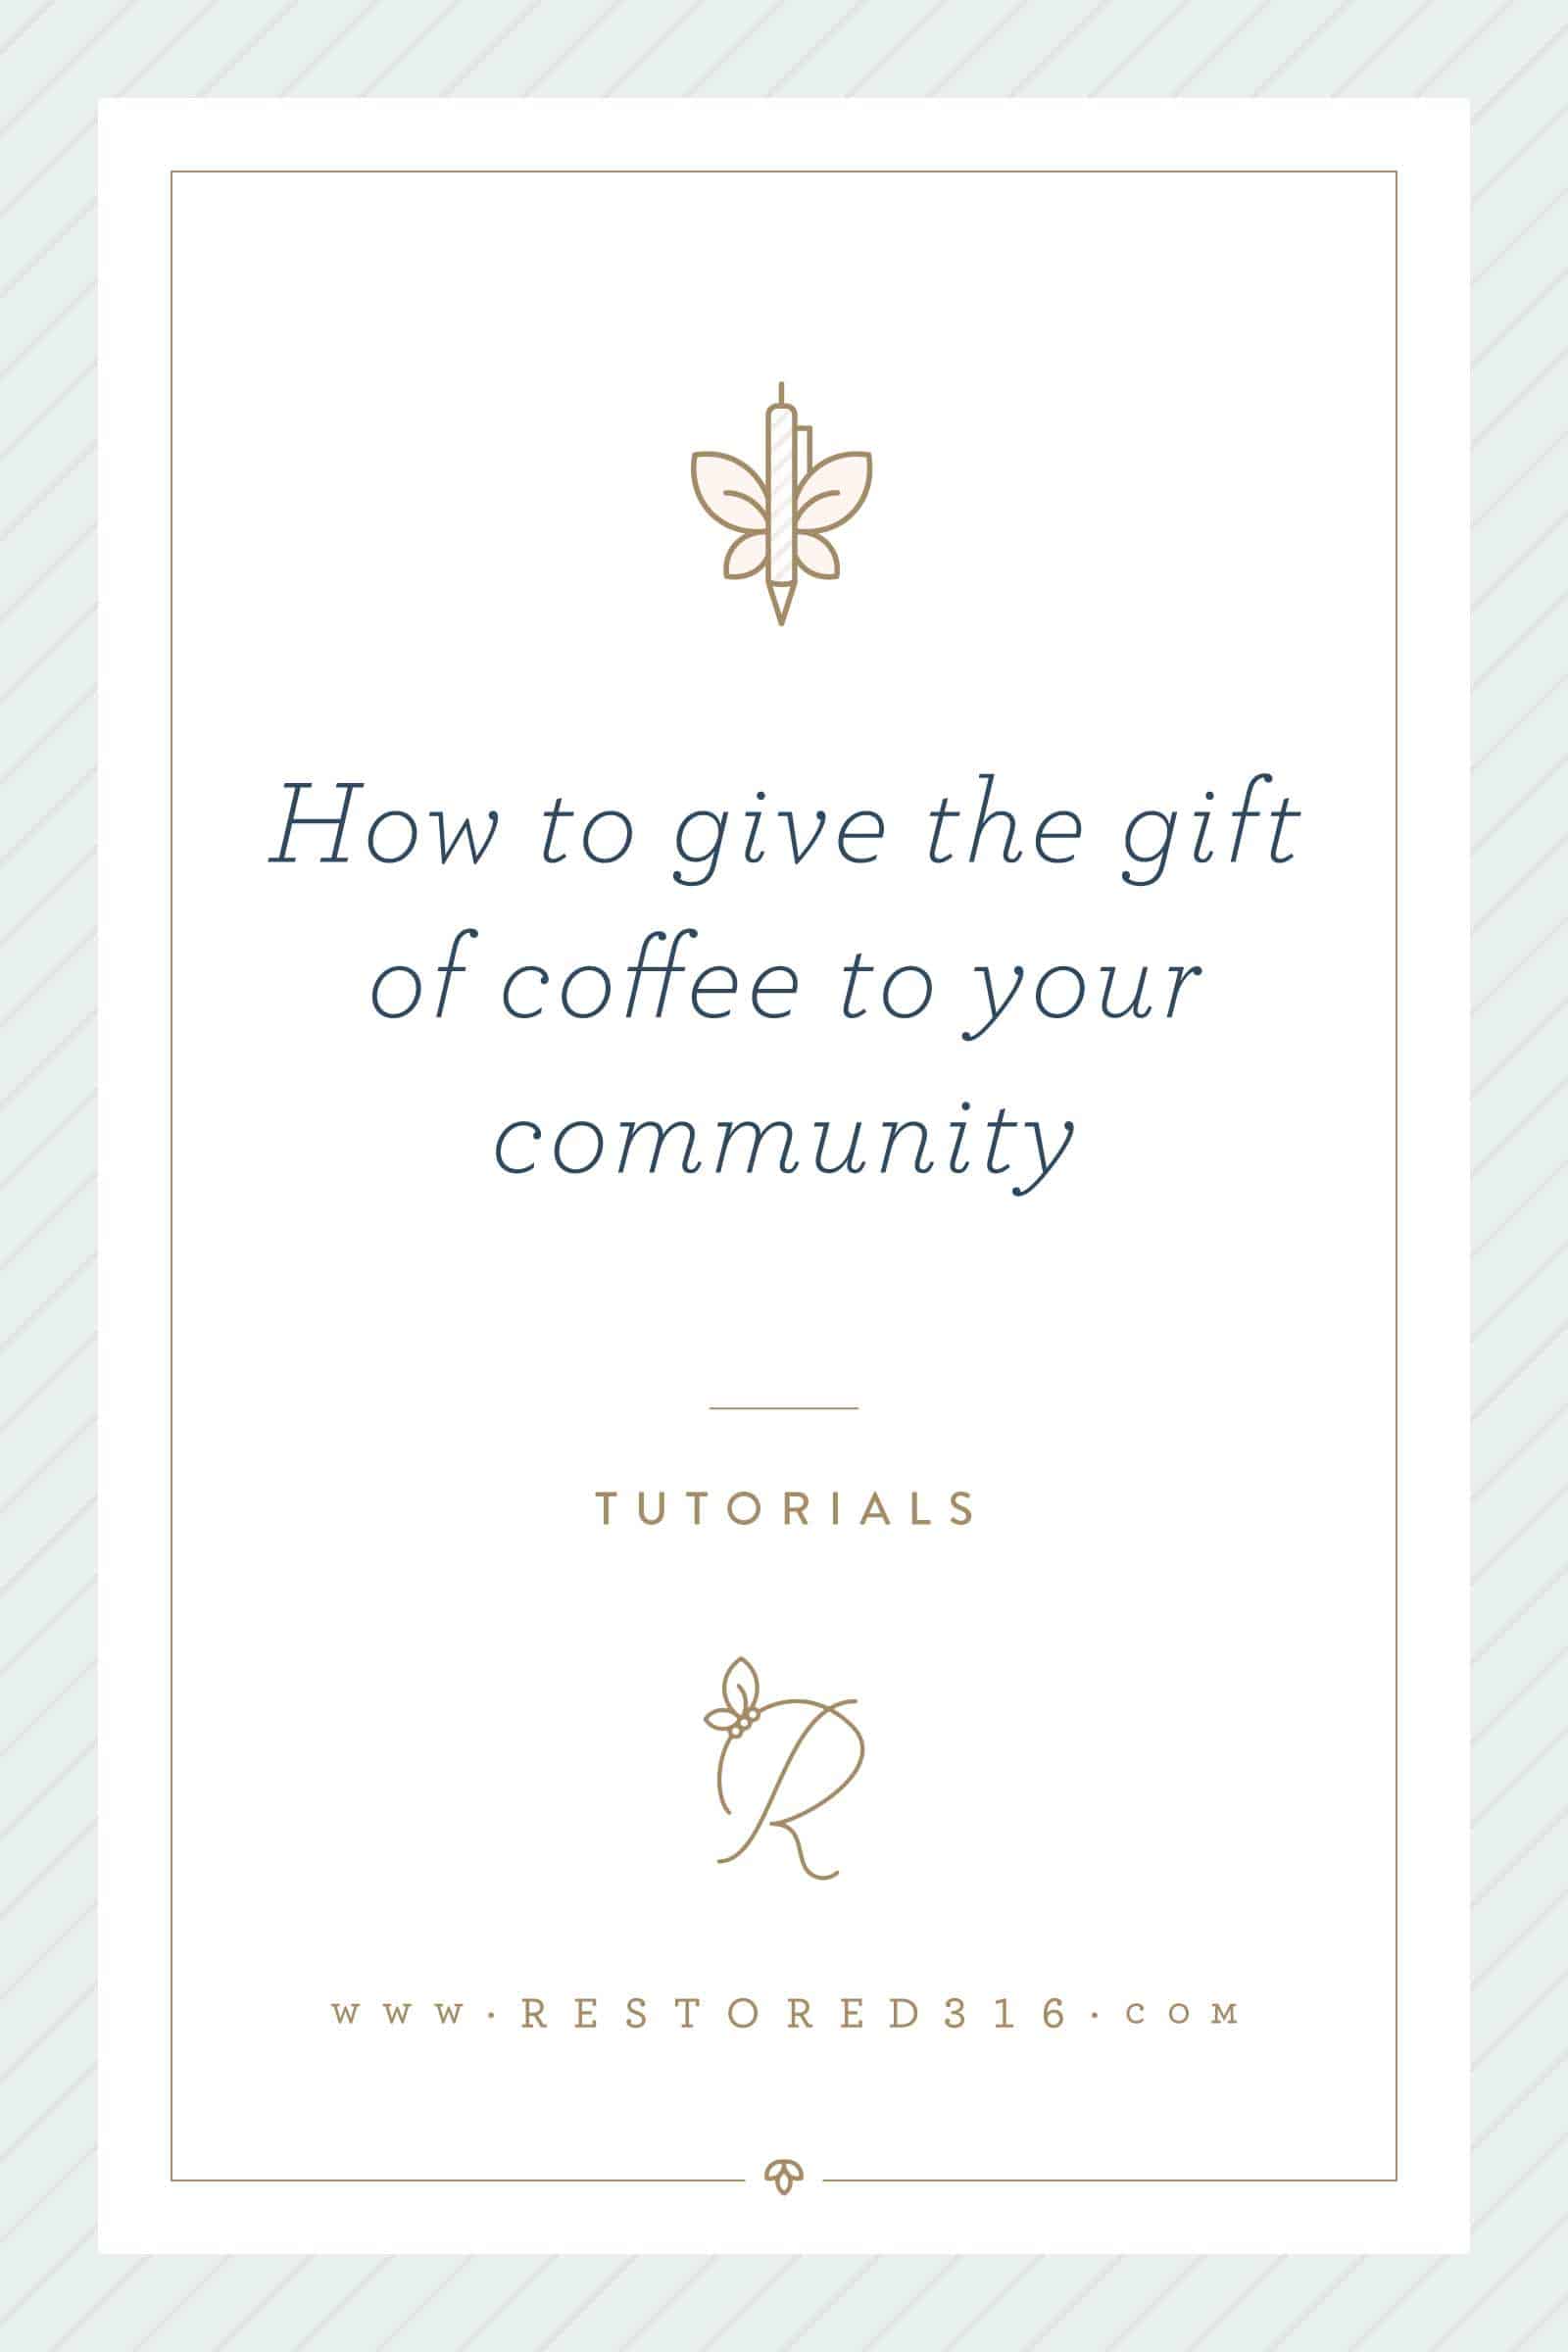 How to give the gift of coffee to your community